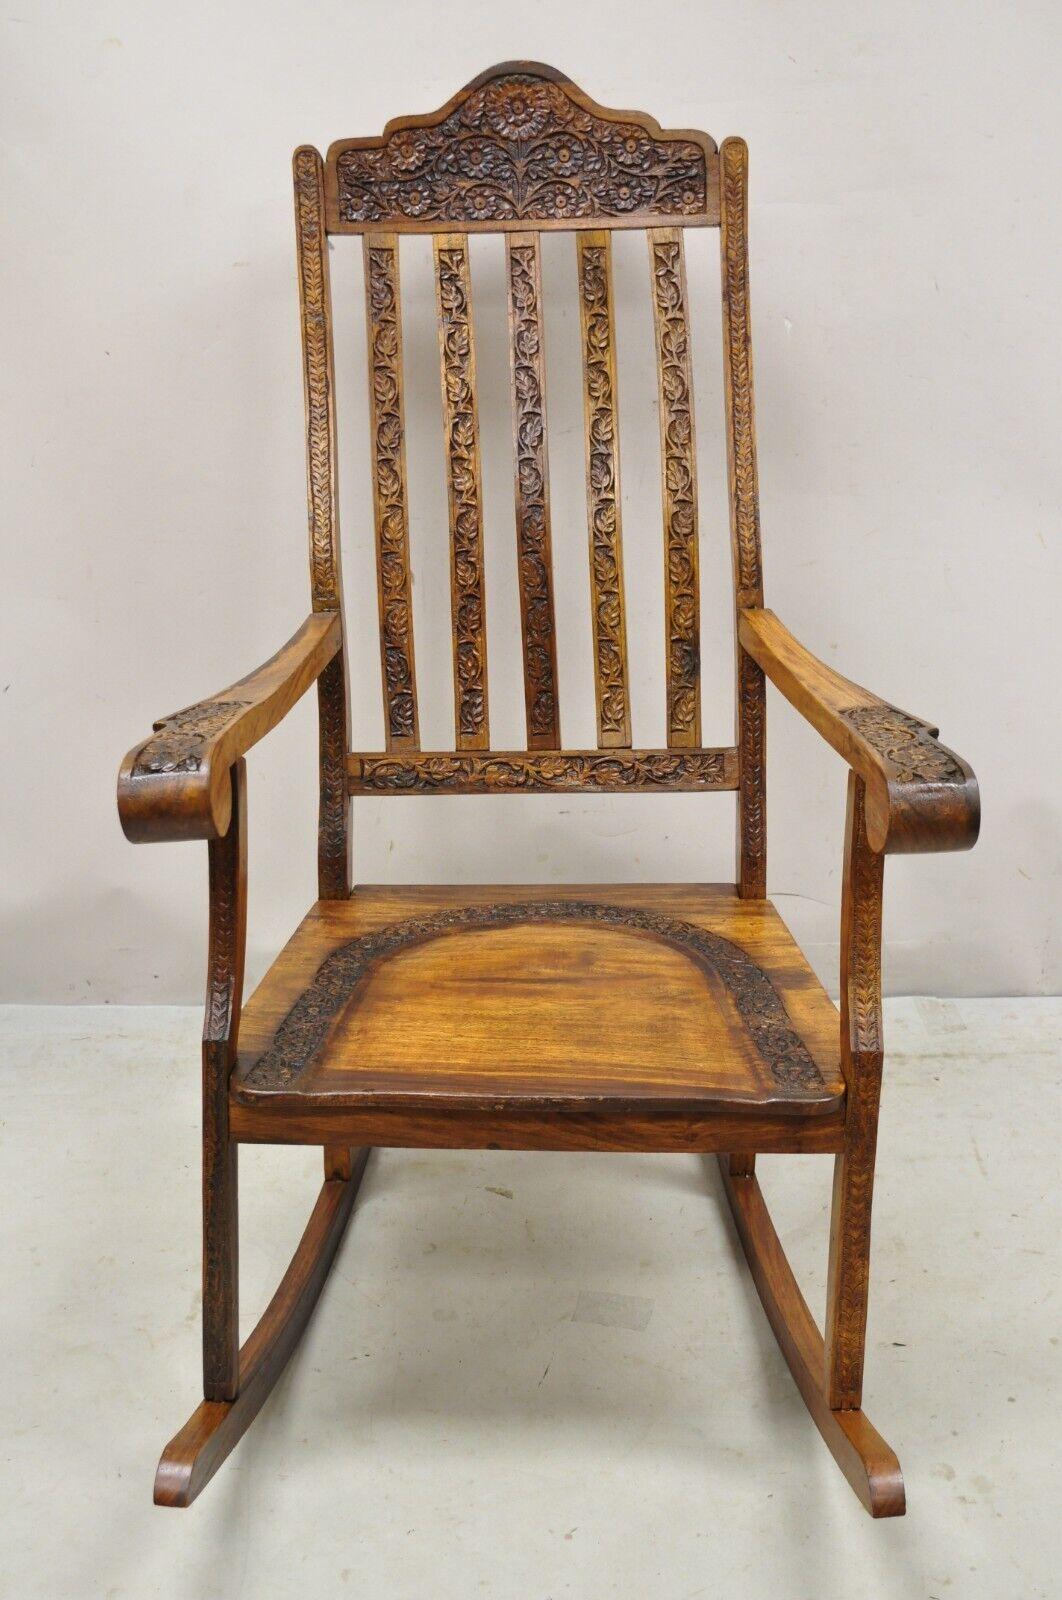 Vintage Anglo Indian carved teak wood rocking chair rocker. Item features a solid wood frame, beautiful wood grain, nicely carved details, very nice vintage item, great style and form, circa Mid-20th Century. Measurements: 42.5